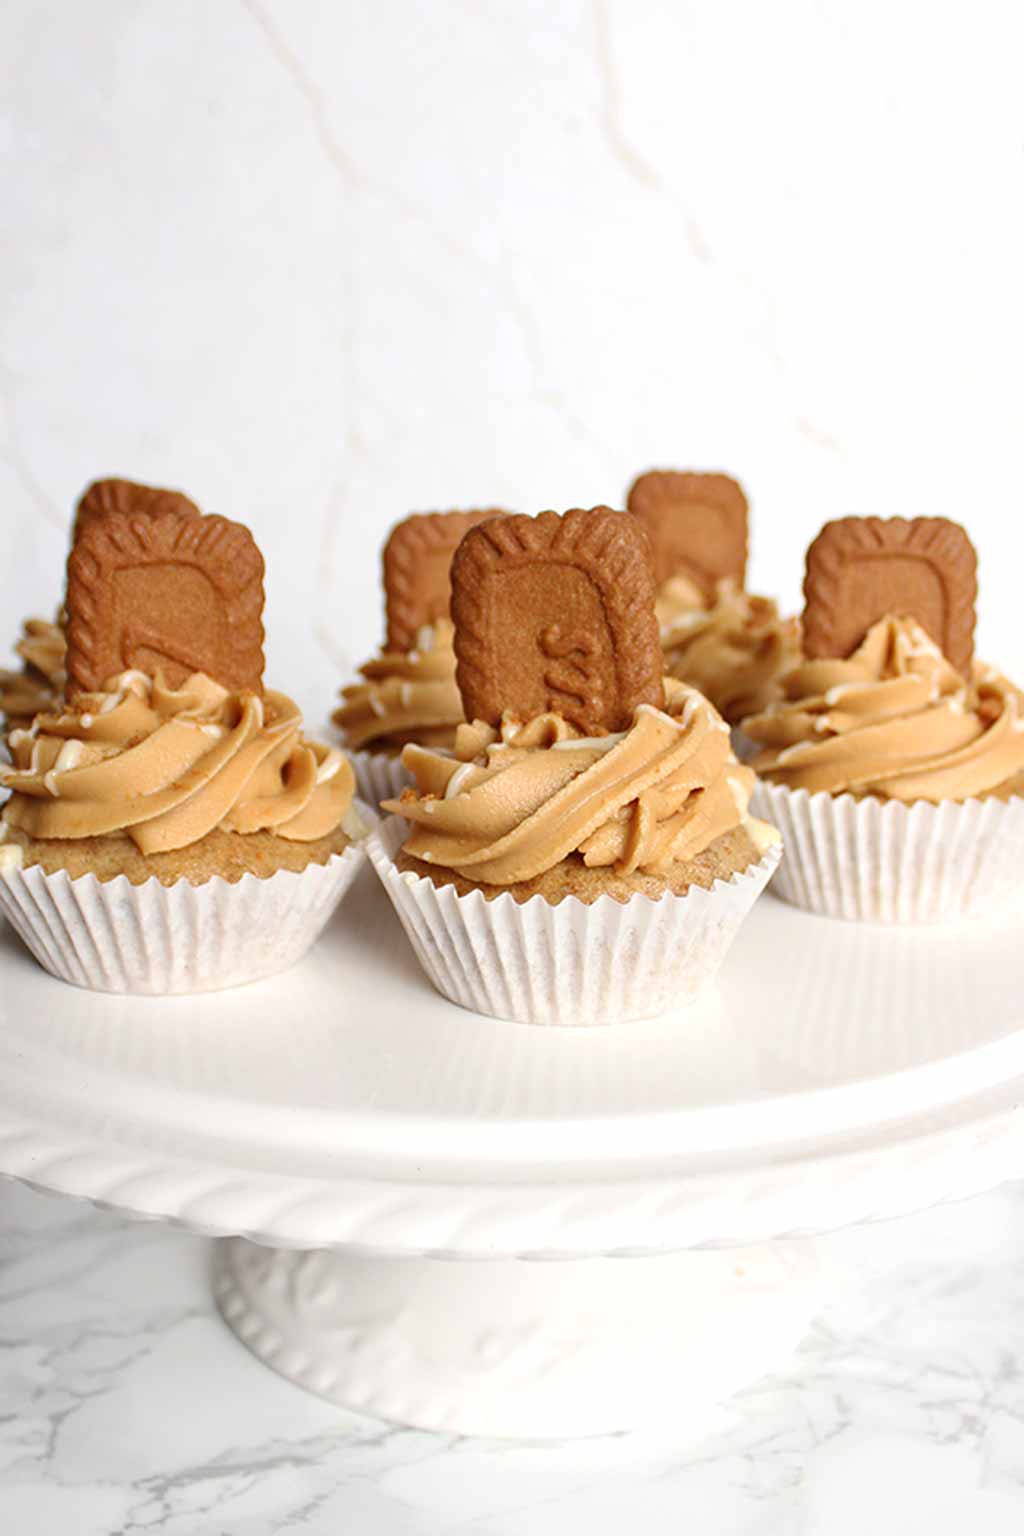 Six Biscoff Cupcakes On A White Cake Stand